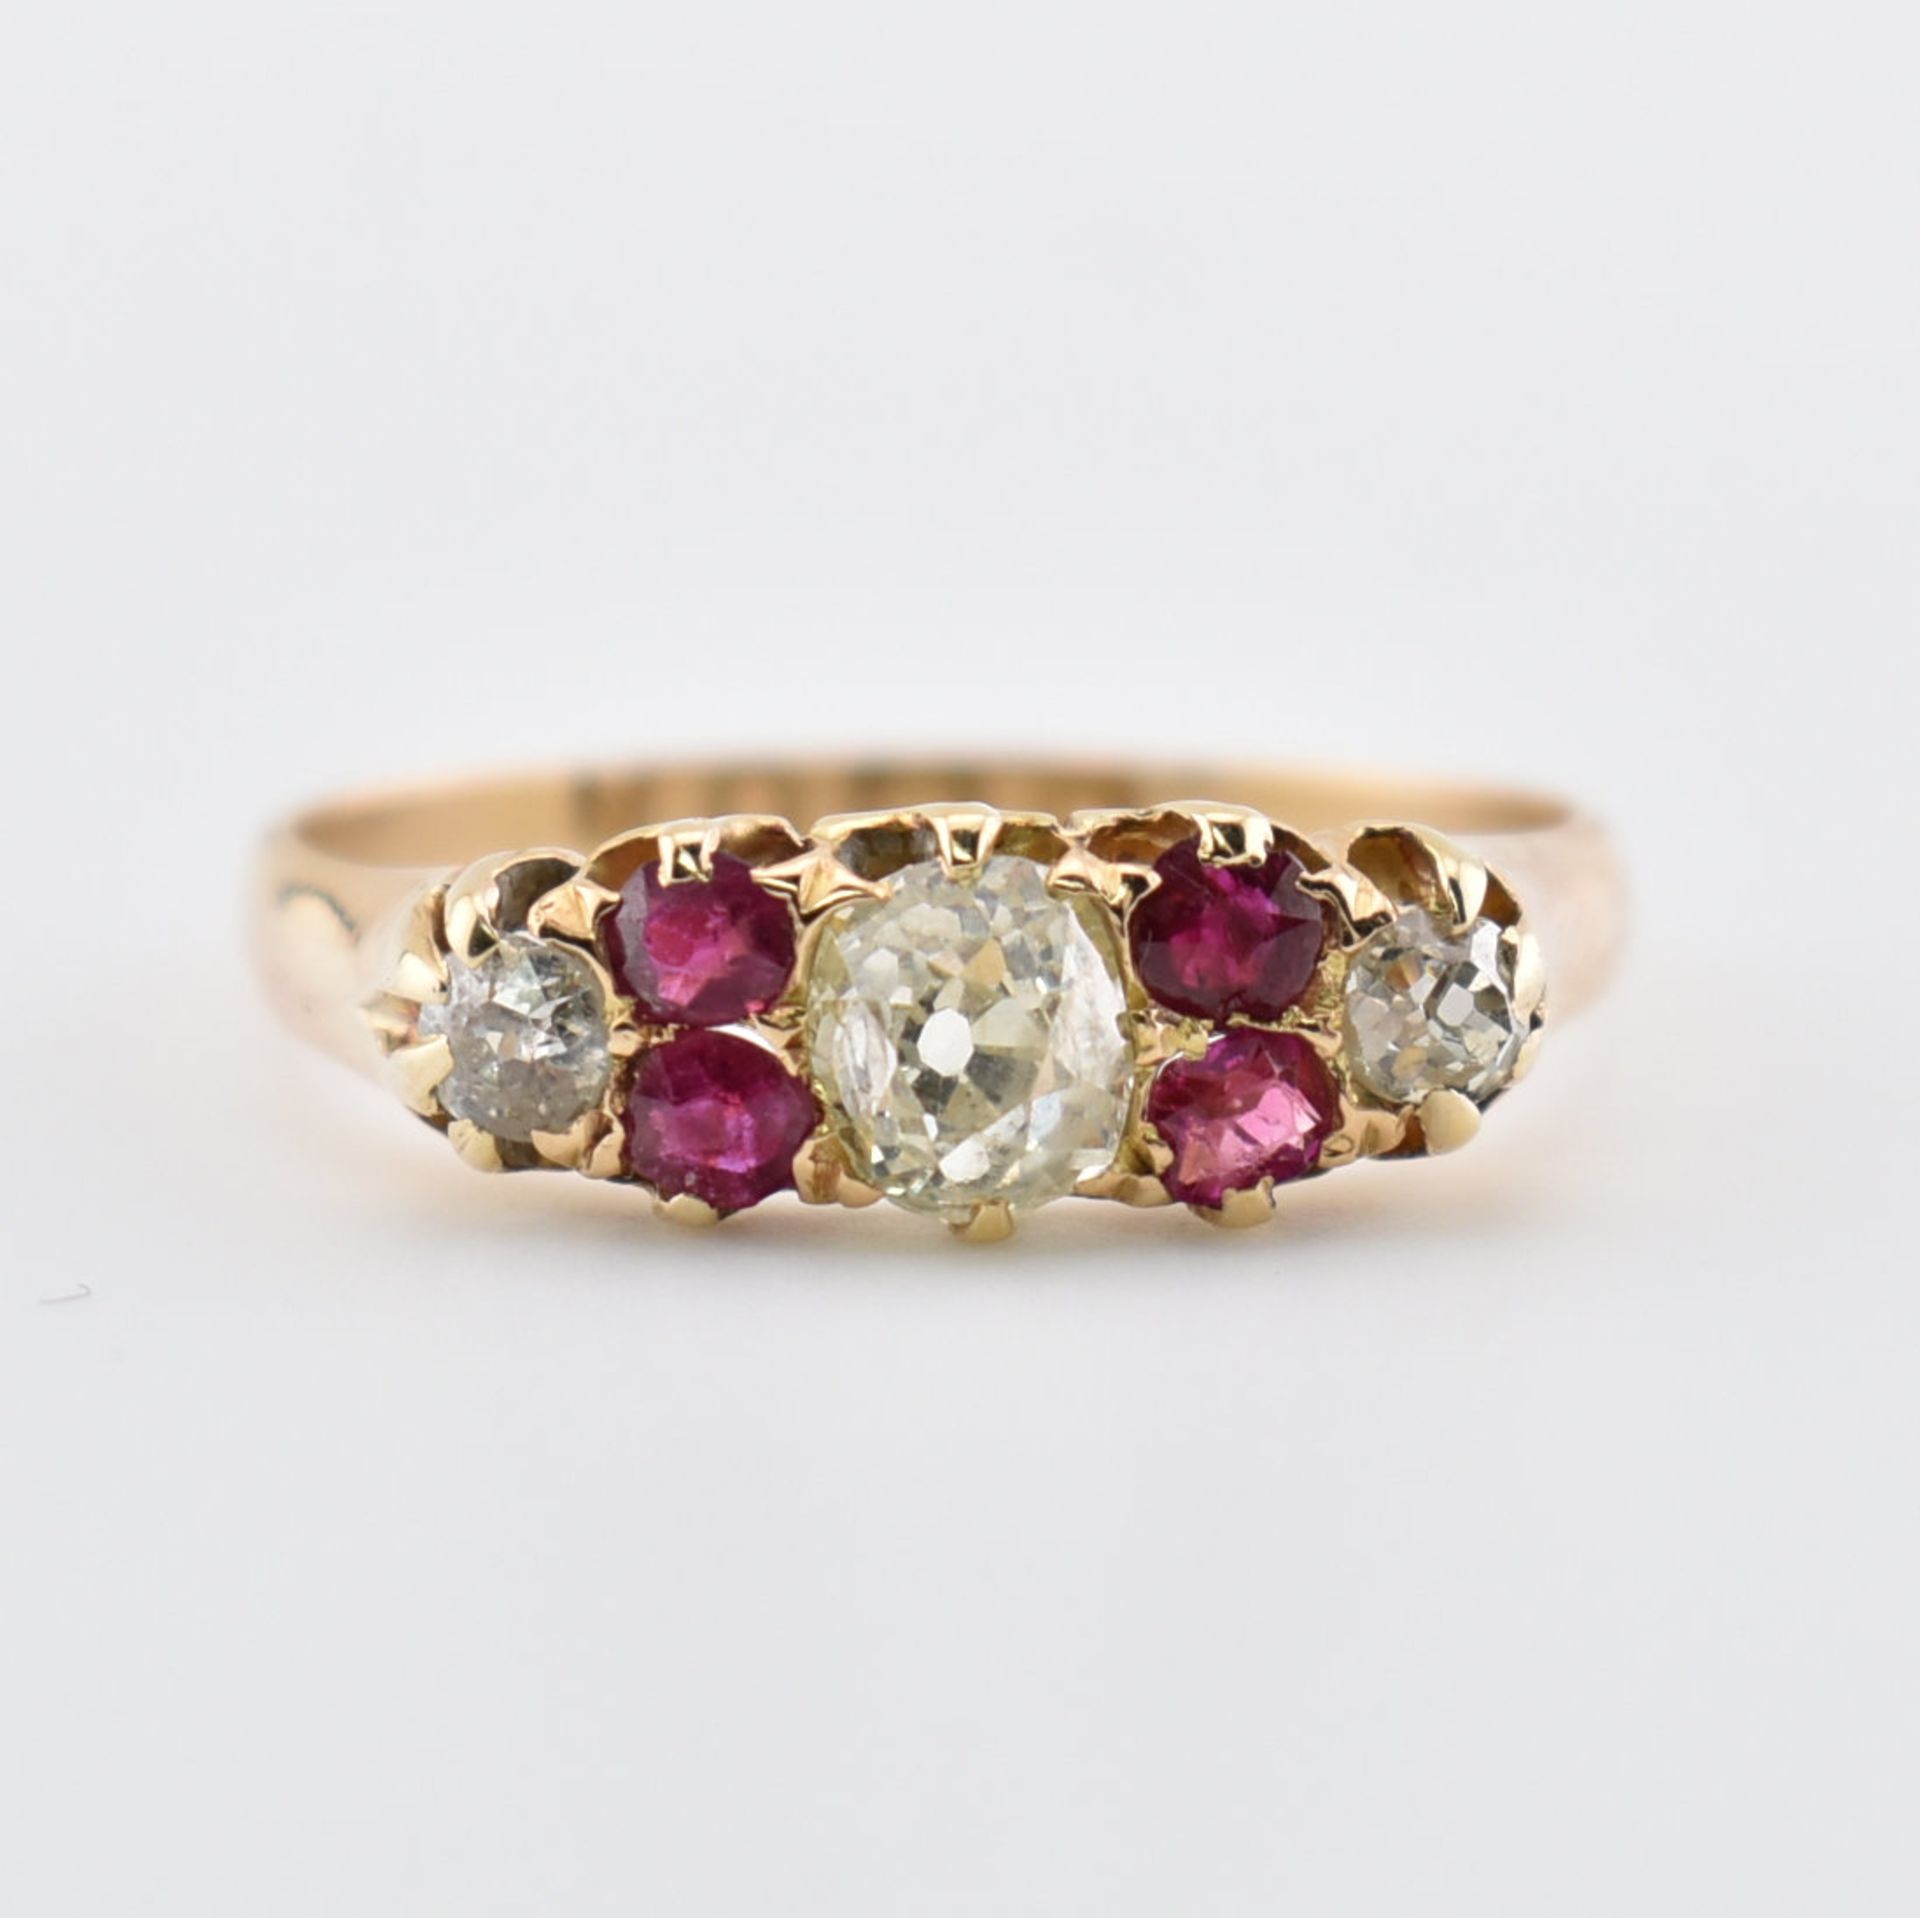 VICTORIAN HALLMARKED 18CT GOLD DIAMOND & RED STONE RING - Image 2 of 7